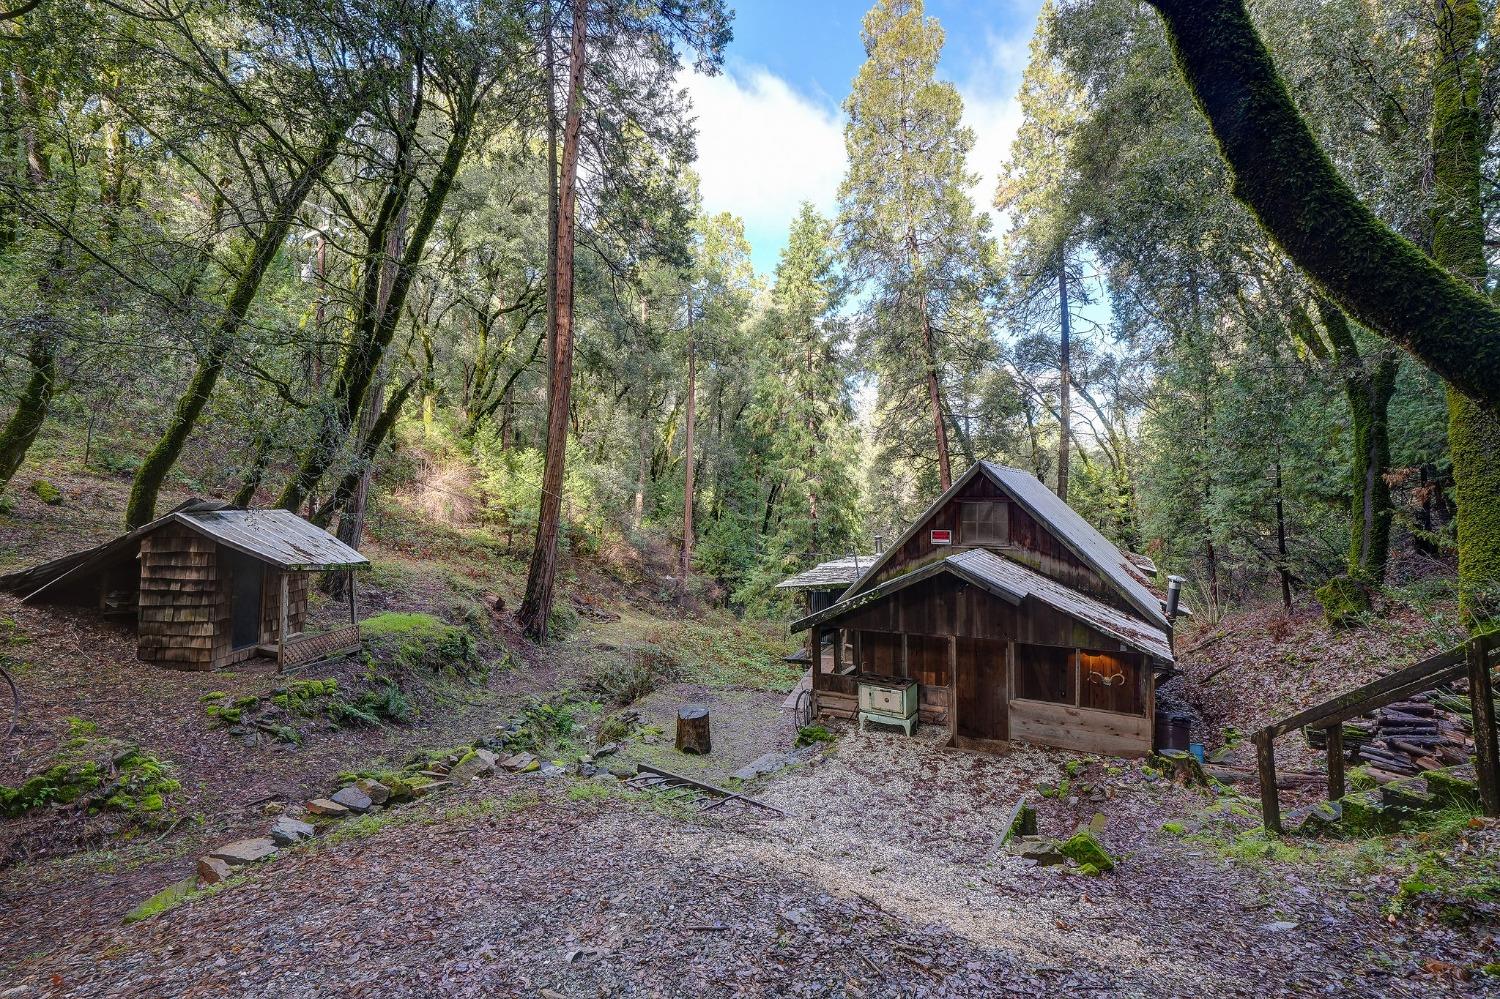 Photo of 17200 Hale Rd in Volcano, CA